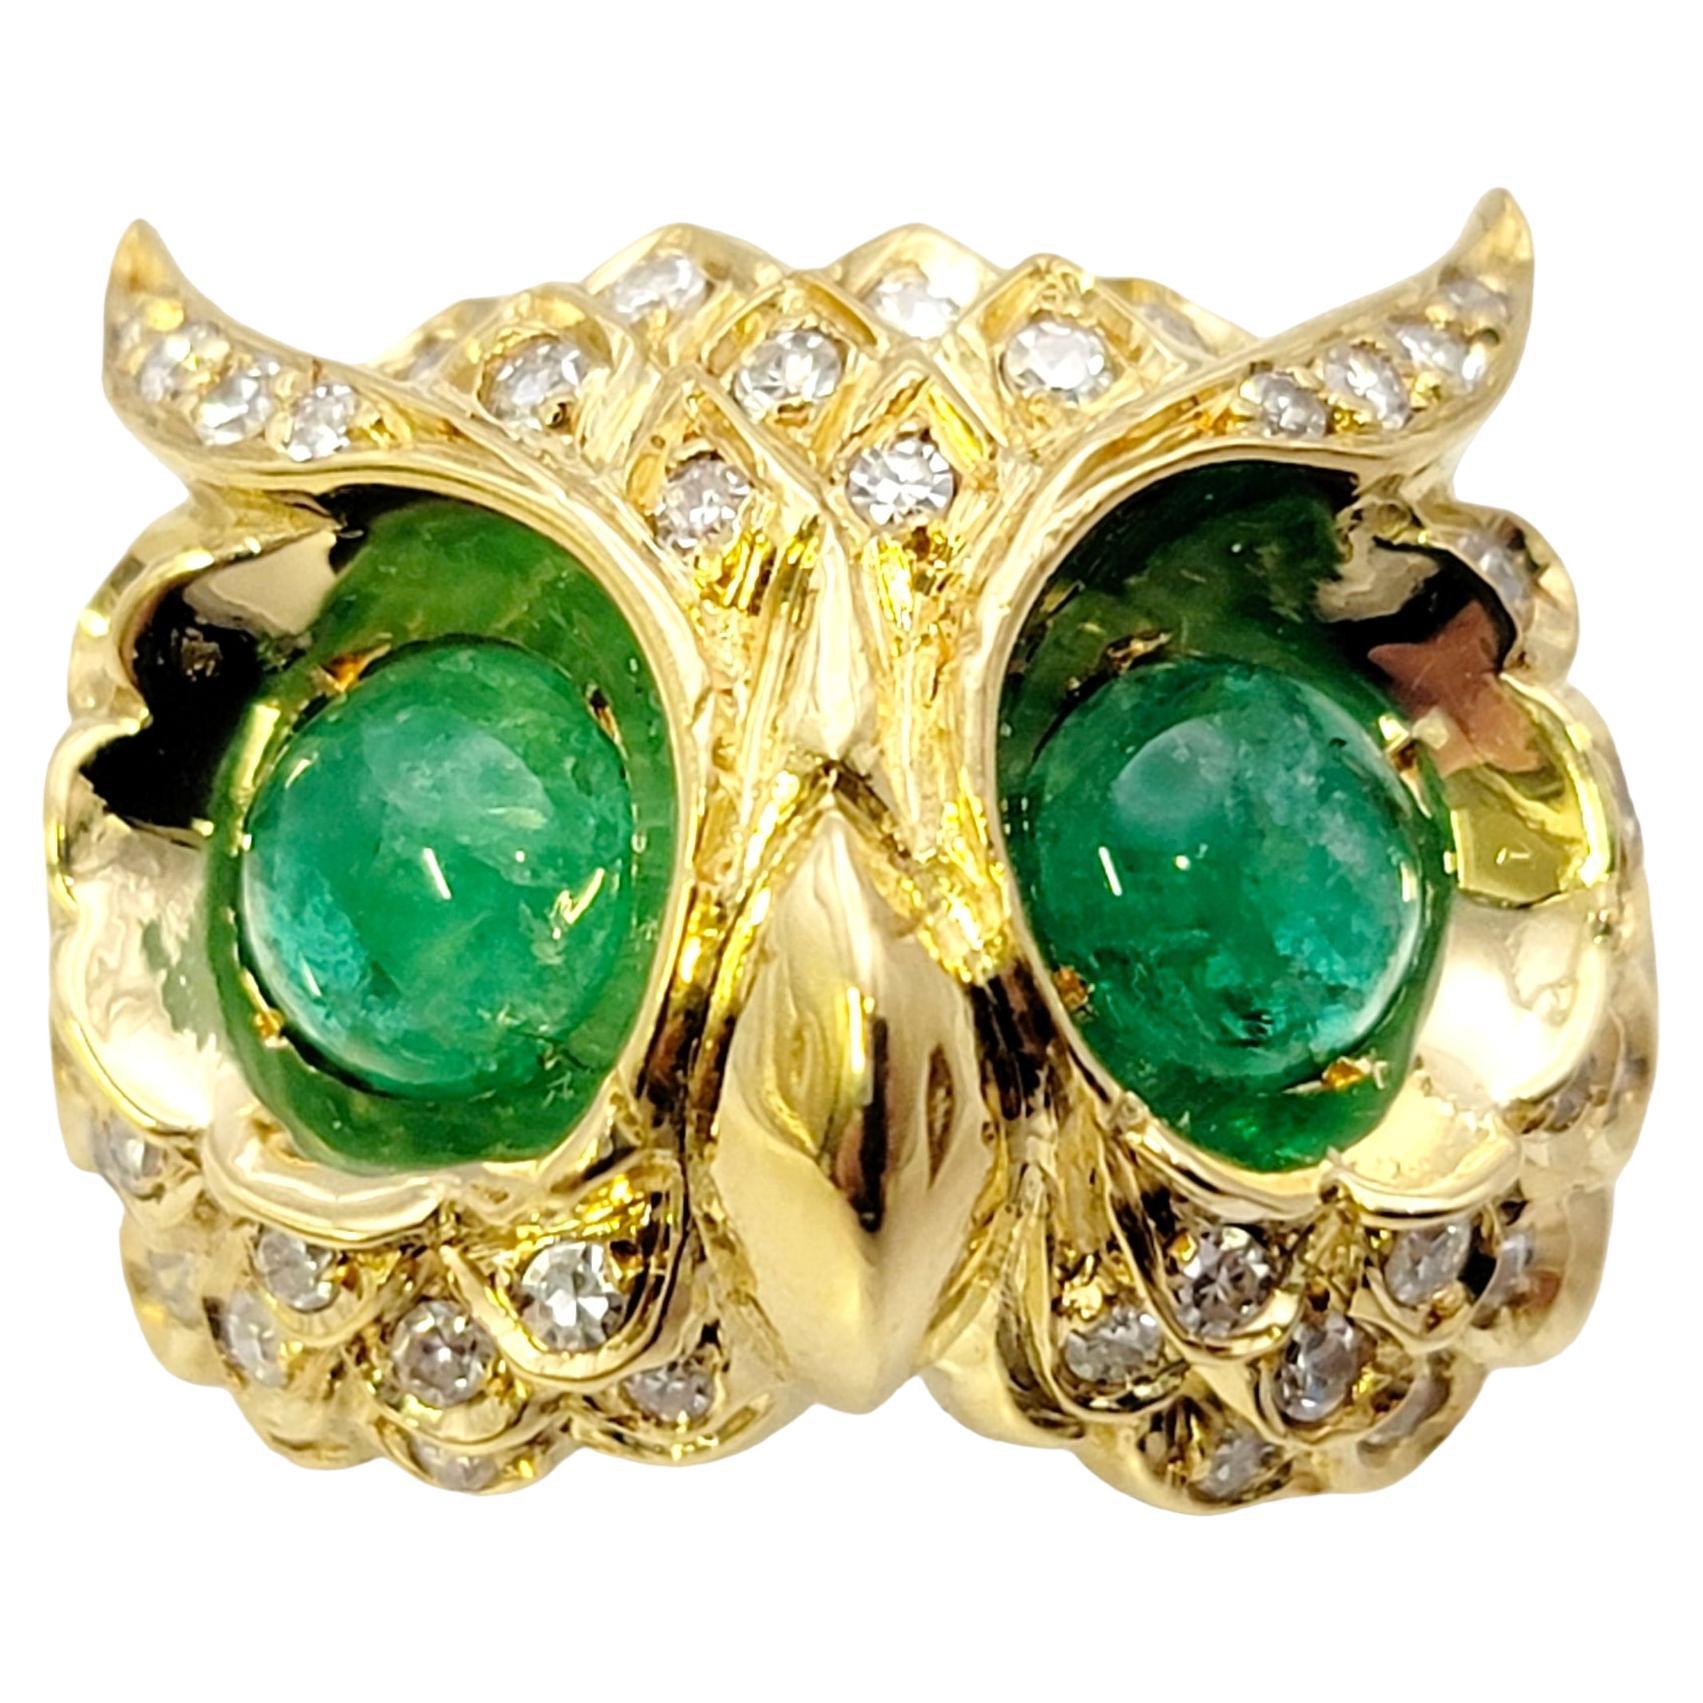 Diamond Embellished Owl Ring with Cabochon Emerald Eyes in 14 Karat Yellow Gold